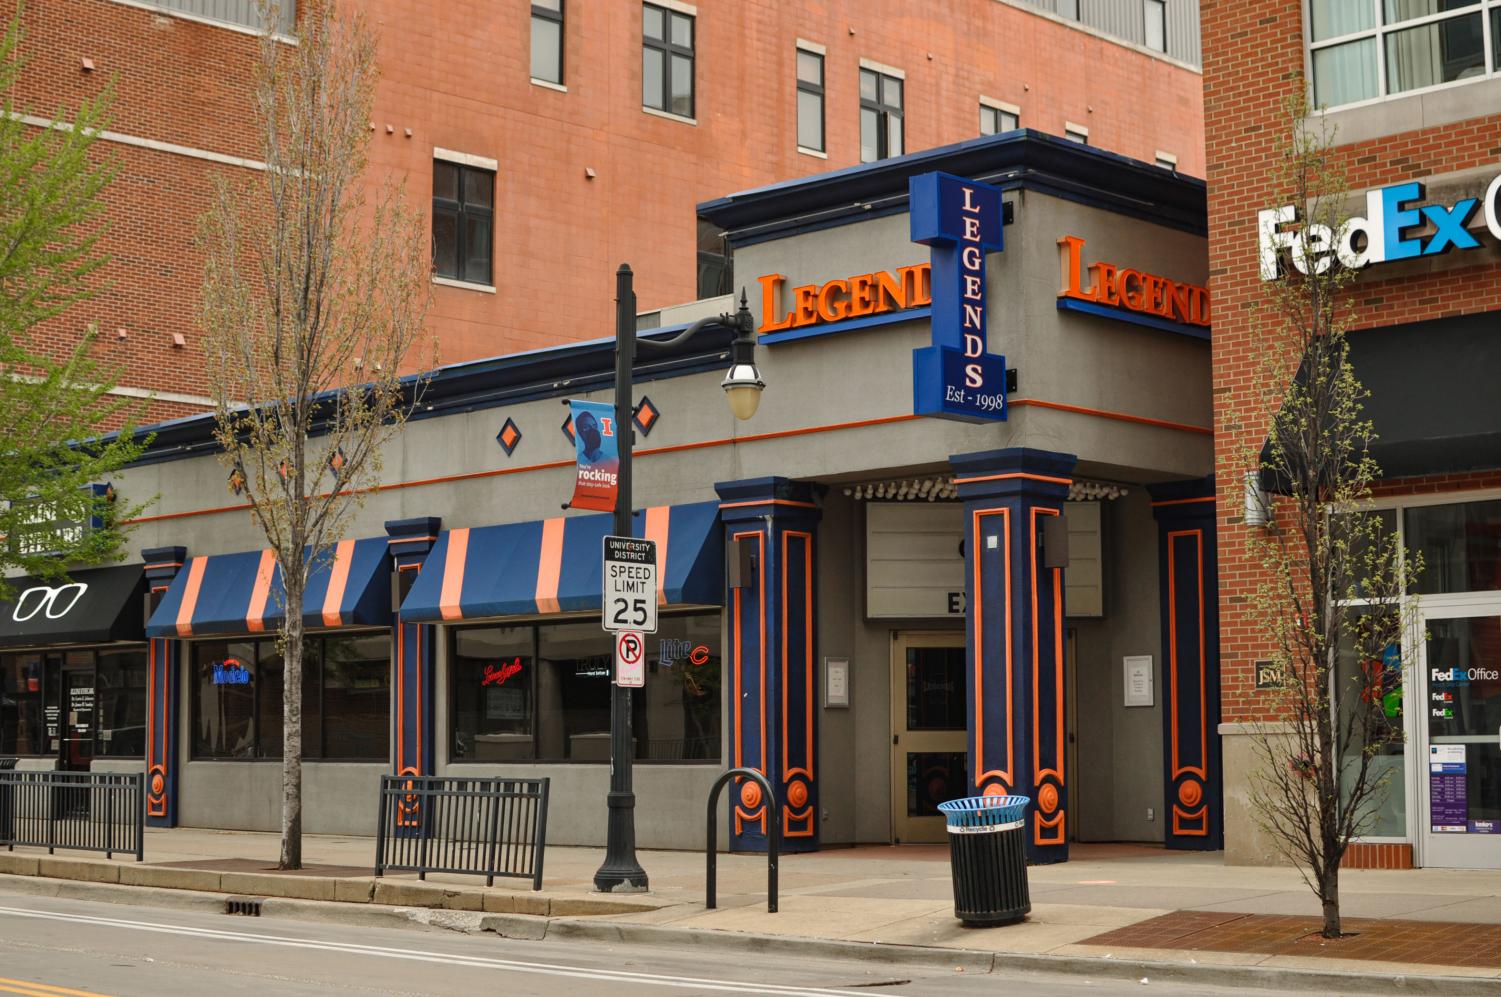 Opinion  Legends is my campus bar of choice - The Daily Illini